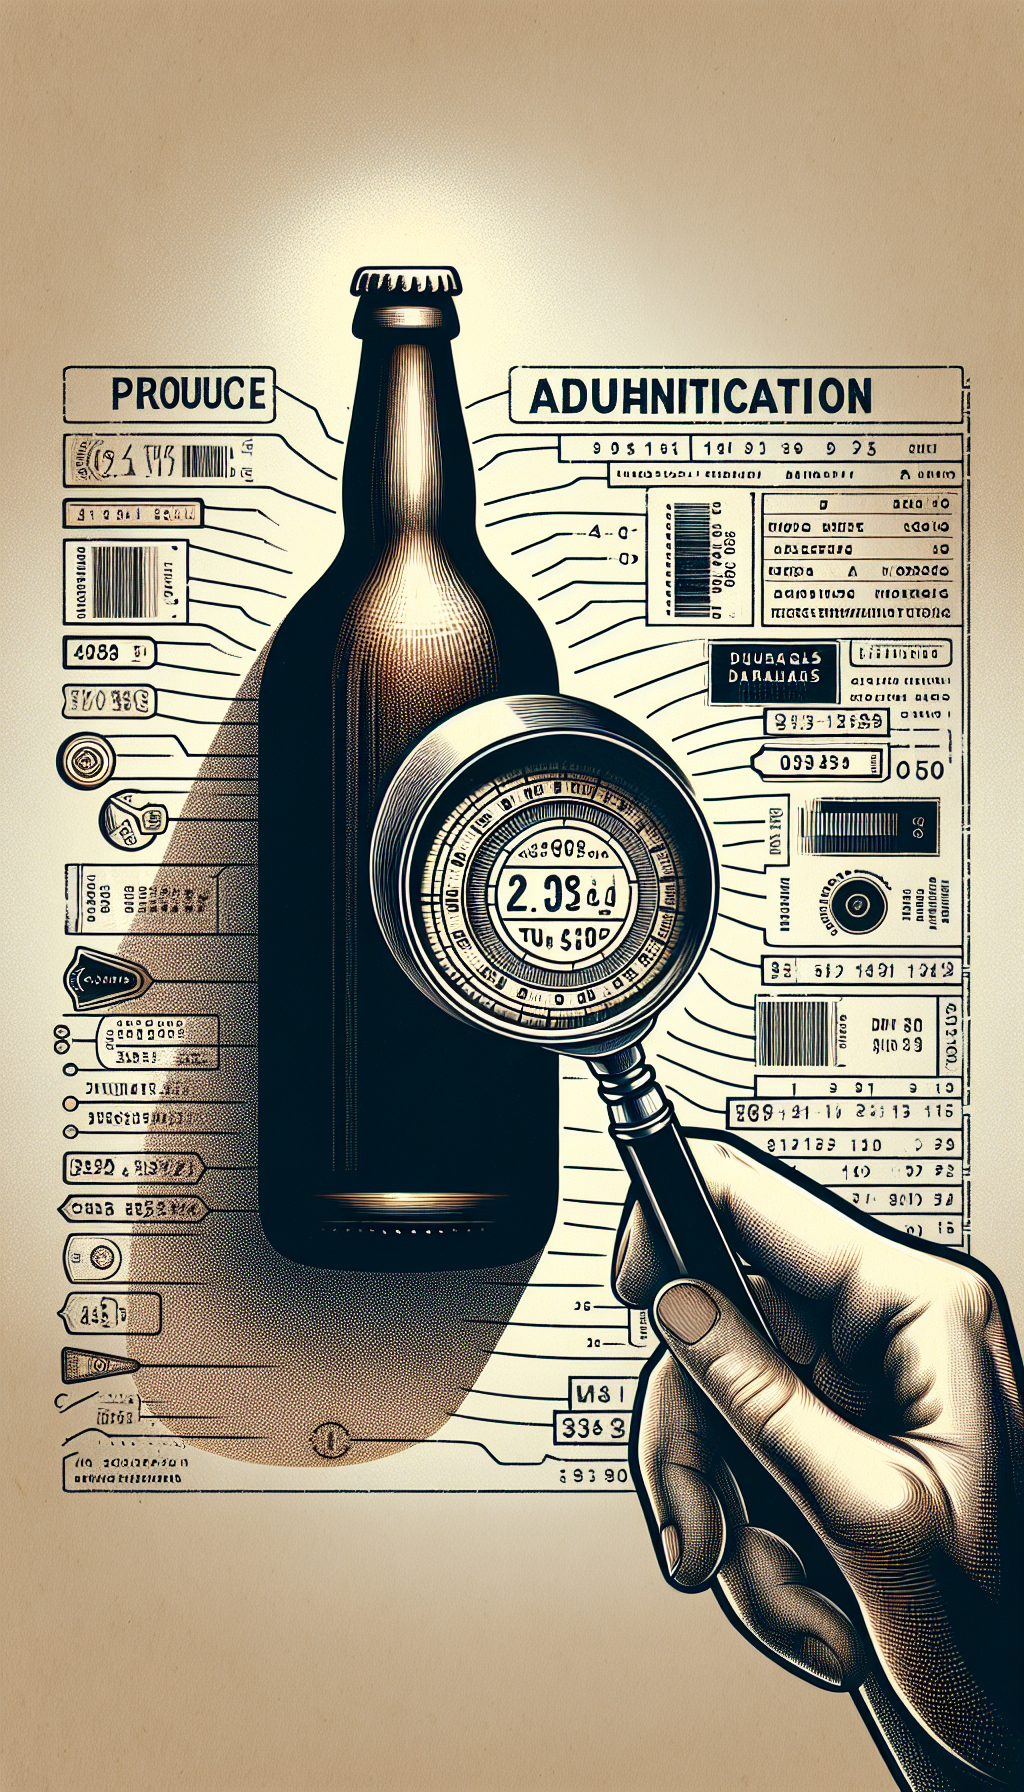 An illustration of a magnifying glass held up against a classic Duraglas bottle, with distinct age marks and patina. The bottleneck appears under scrutiny, revealing discreet tip-offs like date codes and manufacturer's marks. Harsh shadows, reflecting a vintage ambiance, give dimension to the artwork, while an overlay of translucent identification tags illustrates the authentication process.